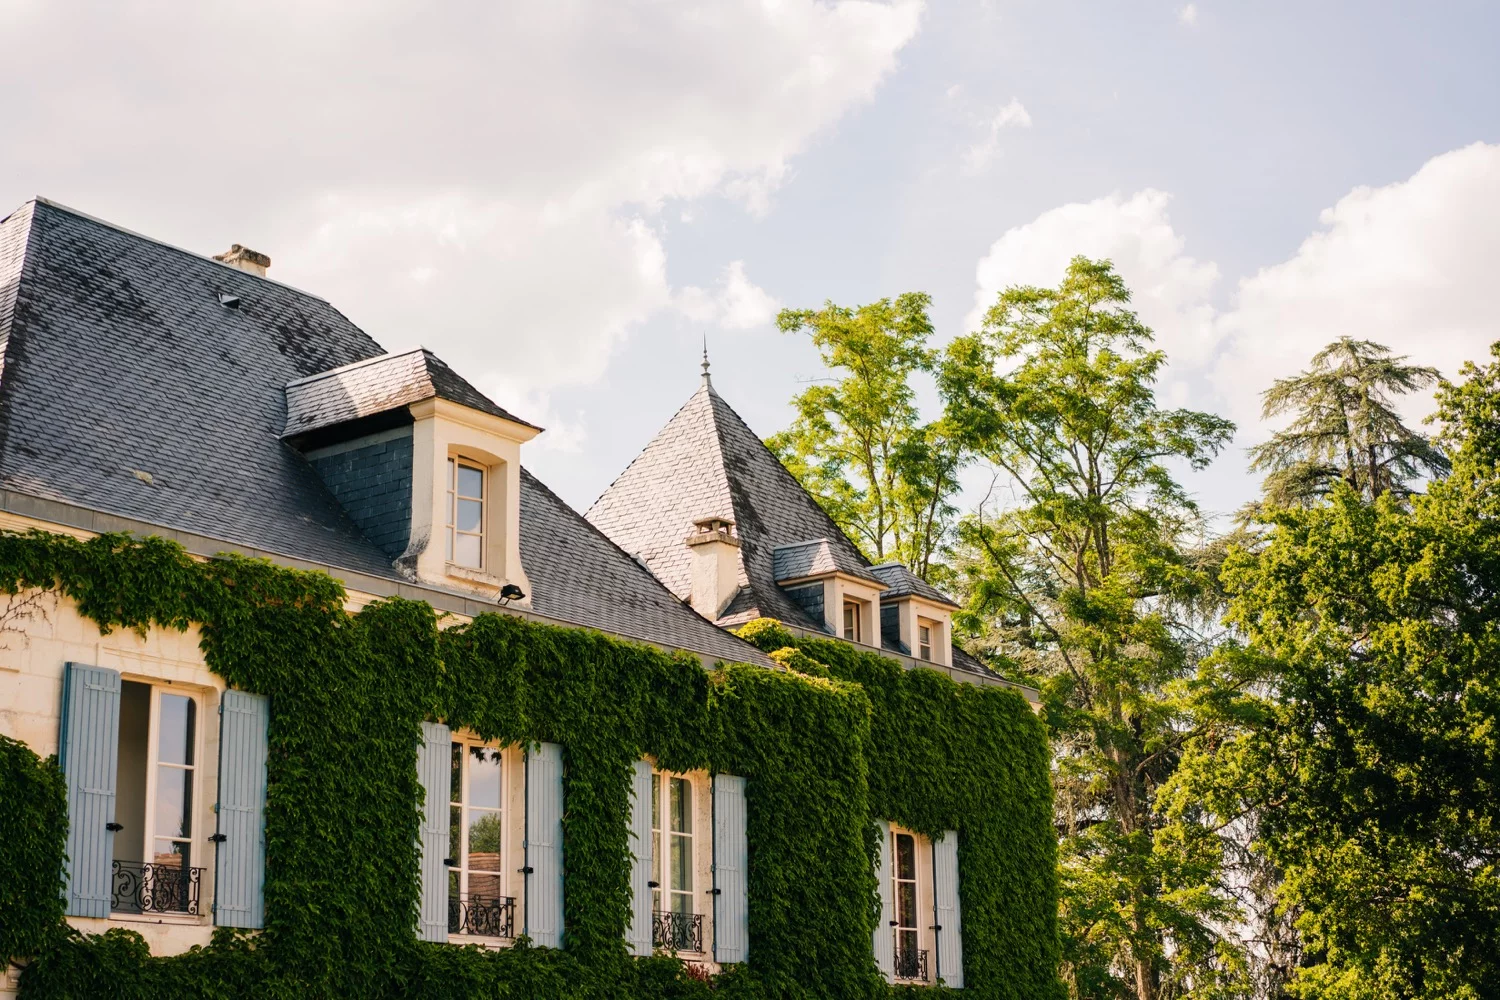 Domaine La Fauconnie mansion in France, one of the most popular wedding venues in Europe.